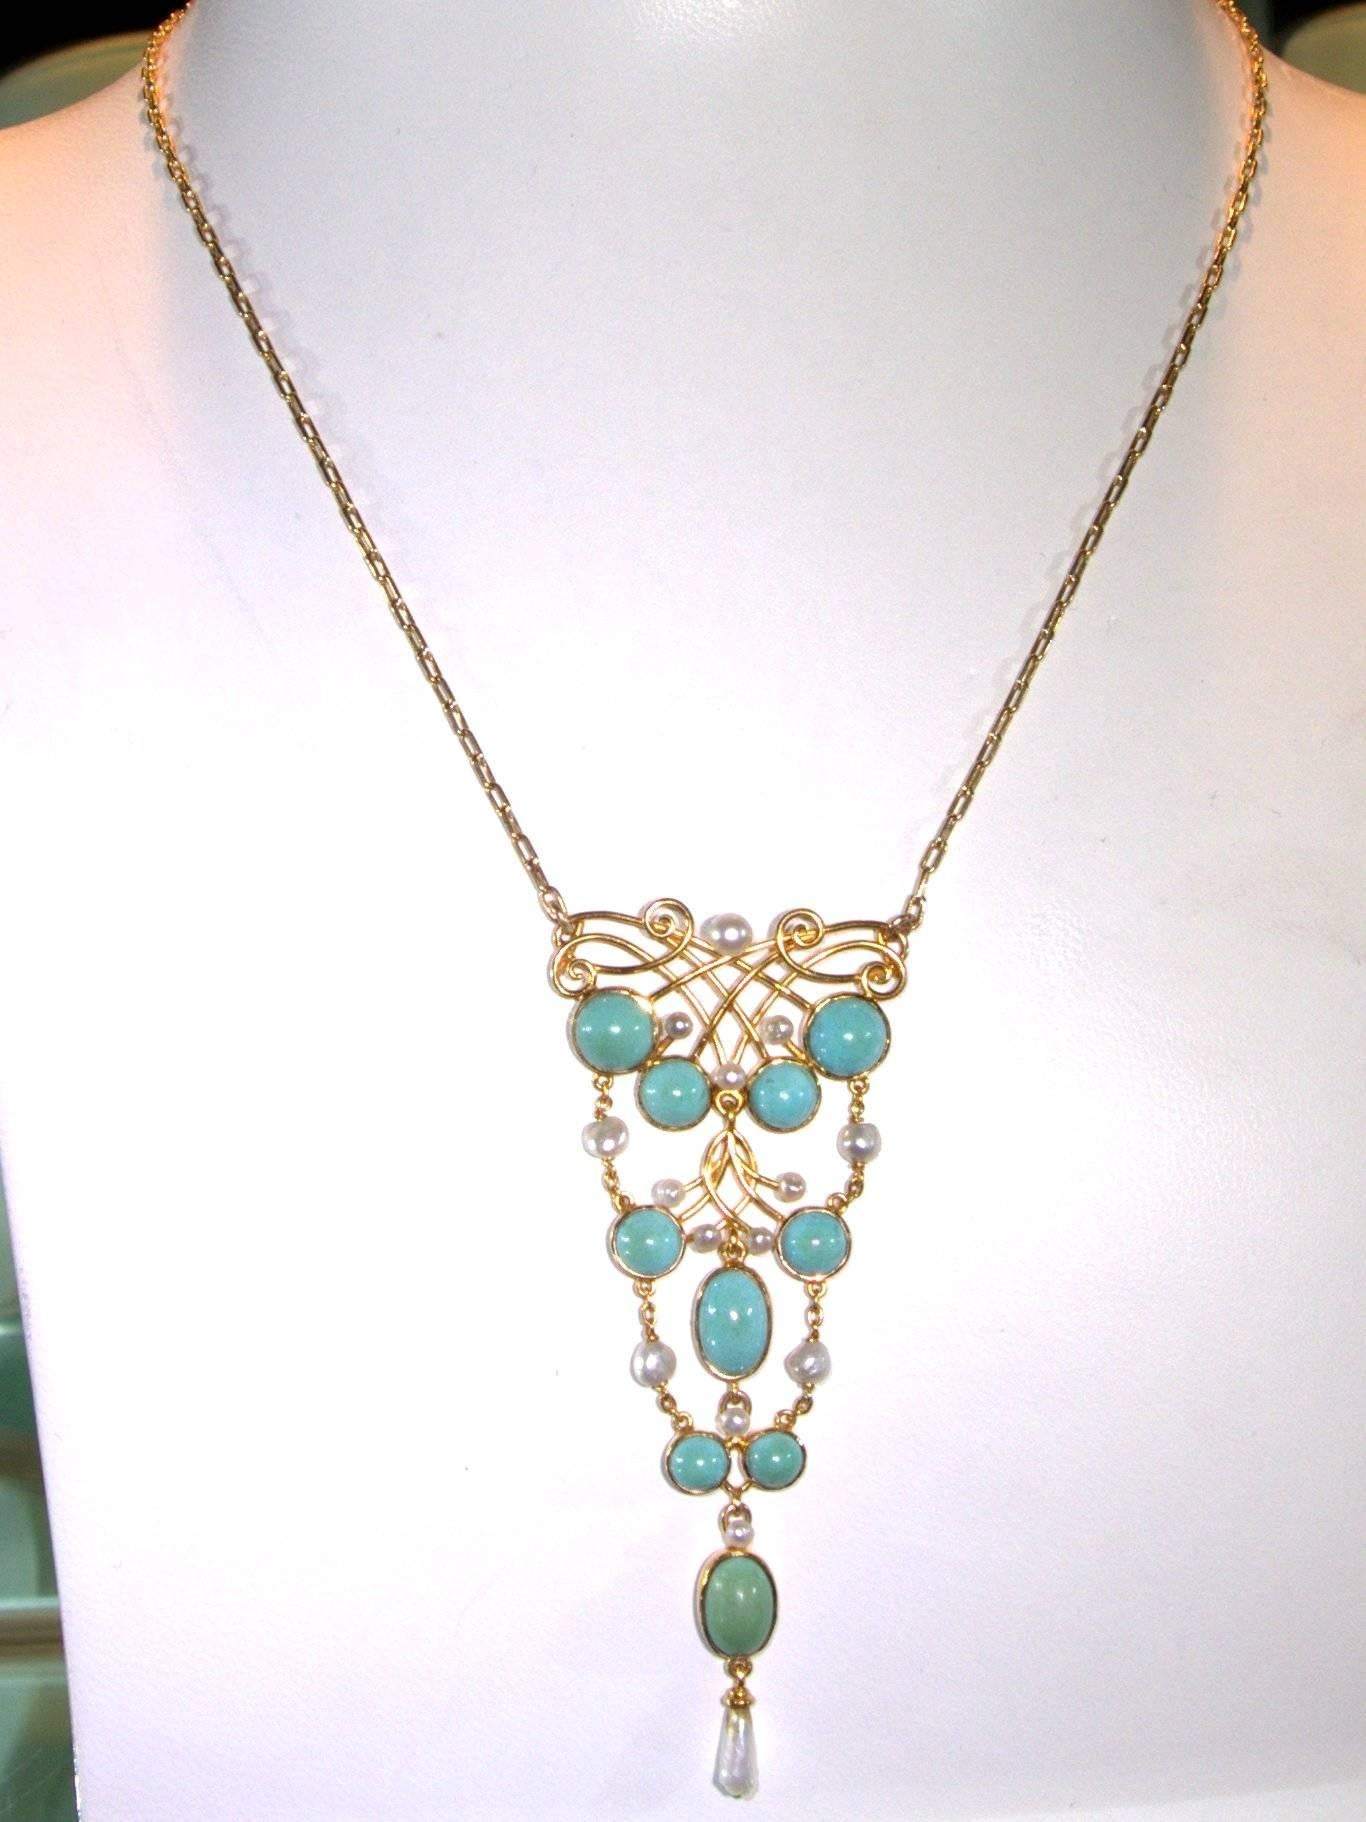  15 natural pearls and 10 turquoise decorate this long Art Nouveau necklace/pendant.  The pendant portion is 3 inches long and it is suspended from the original chain which is 17 inches long. This 14K (marked 585) is European, circa 1905.